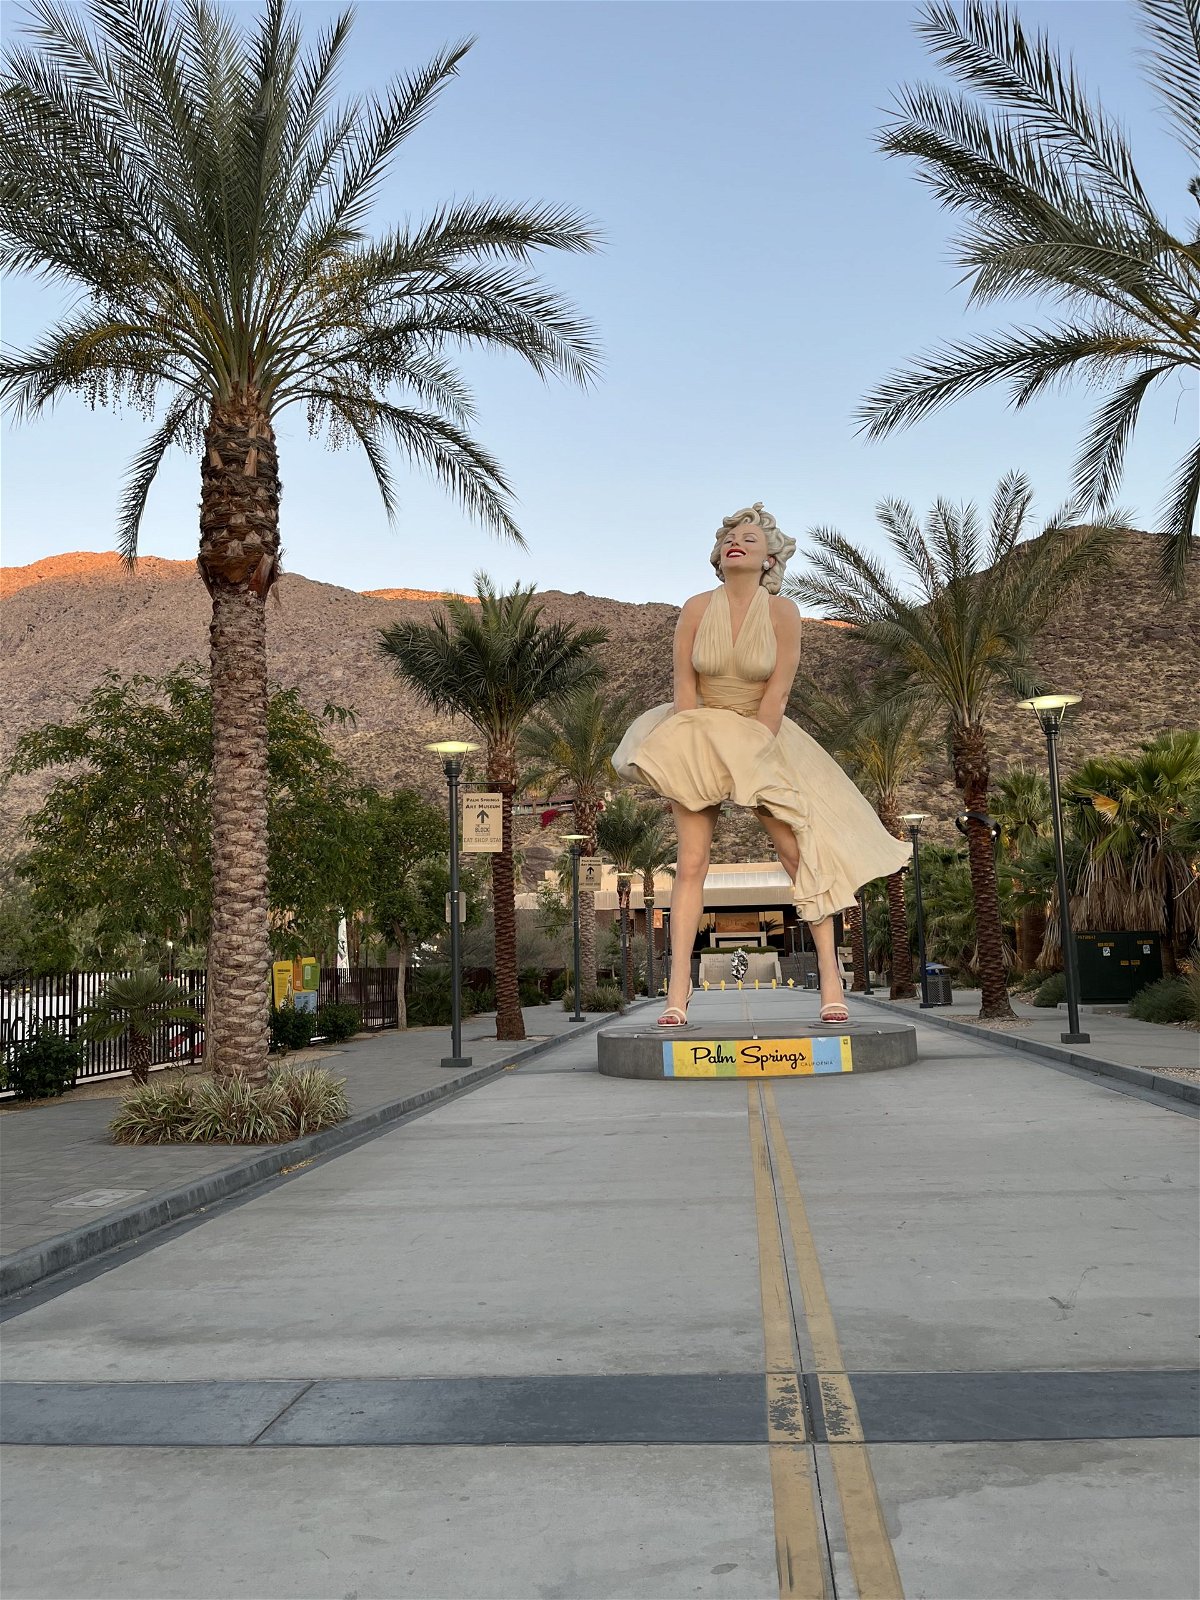 It's all about her when you are in Palm Springs #MarilynMonroe 💖 # palmsprings #palmspringspride #palmspringsstyle #pink #prettyinpink